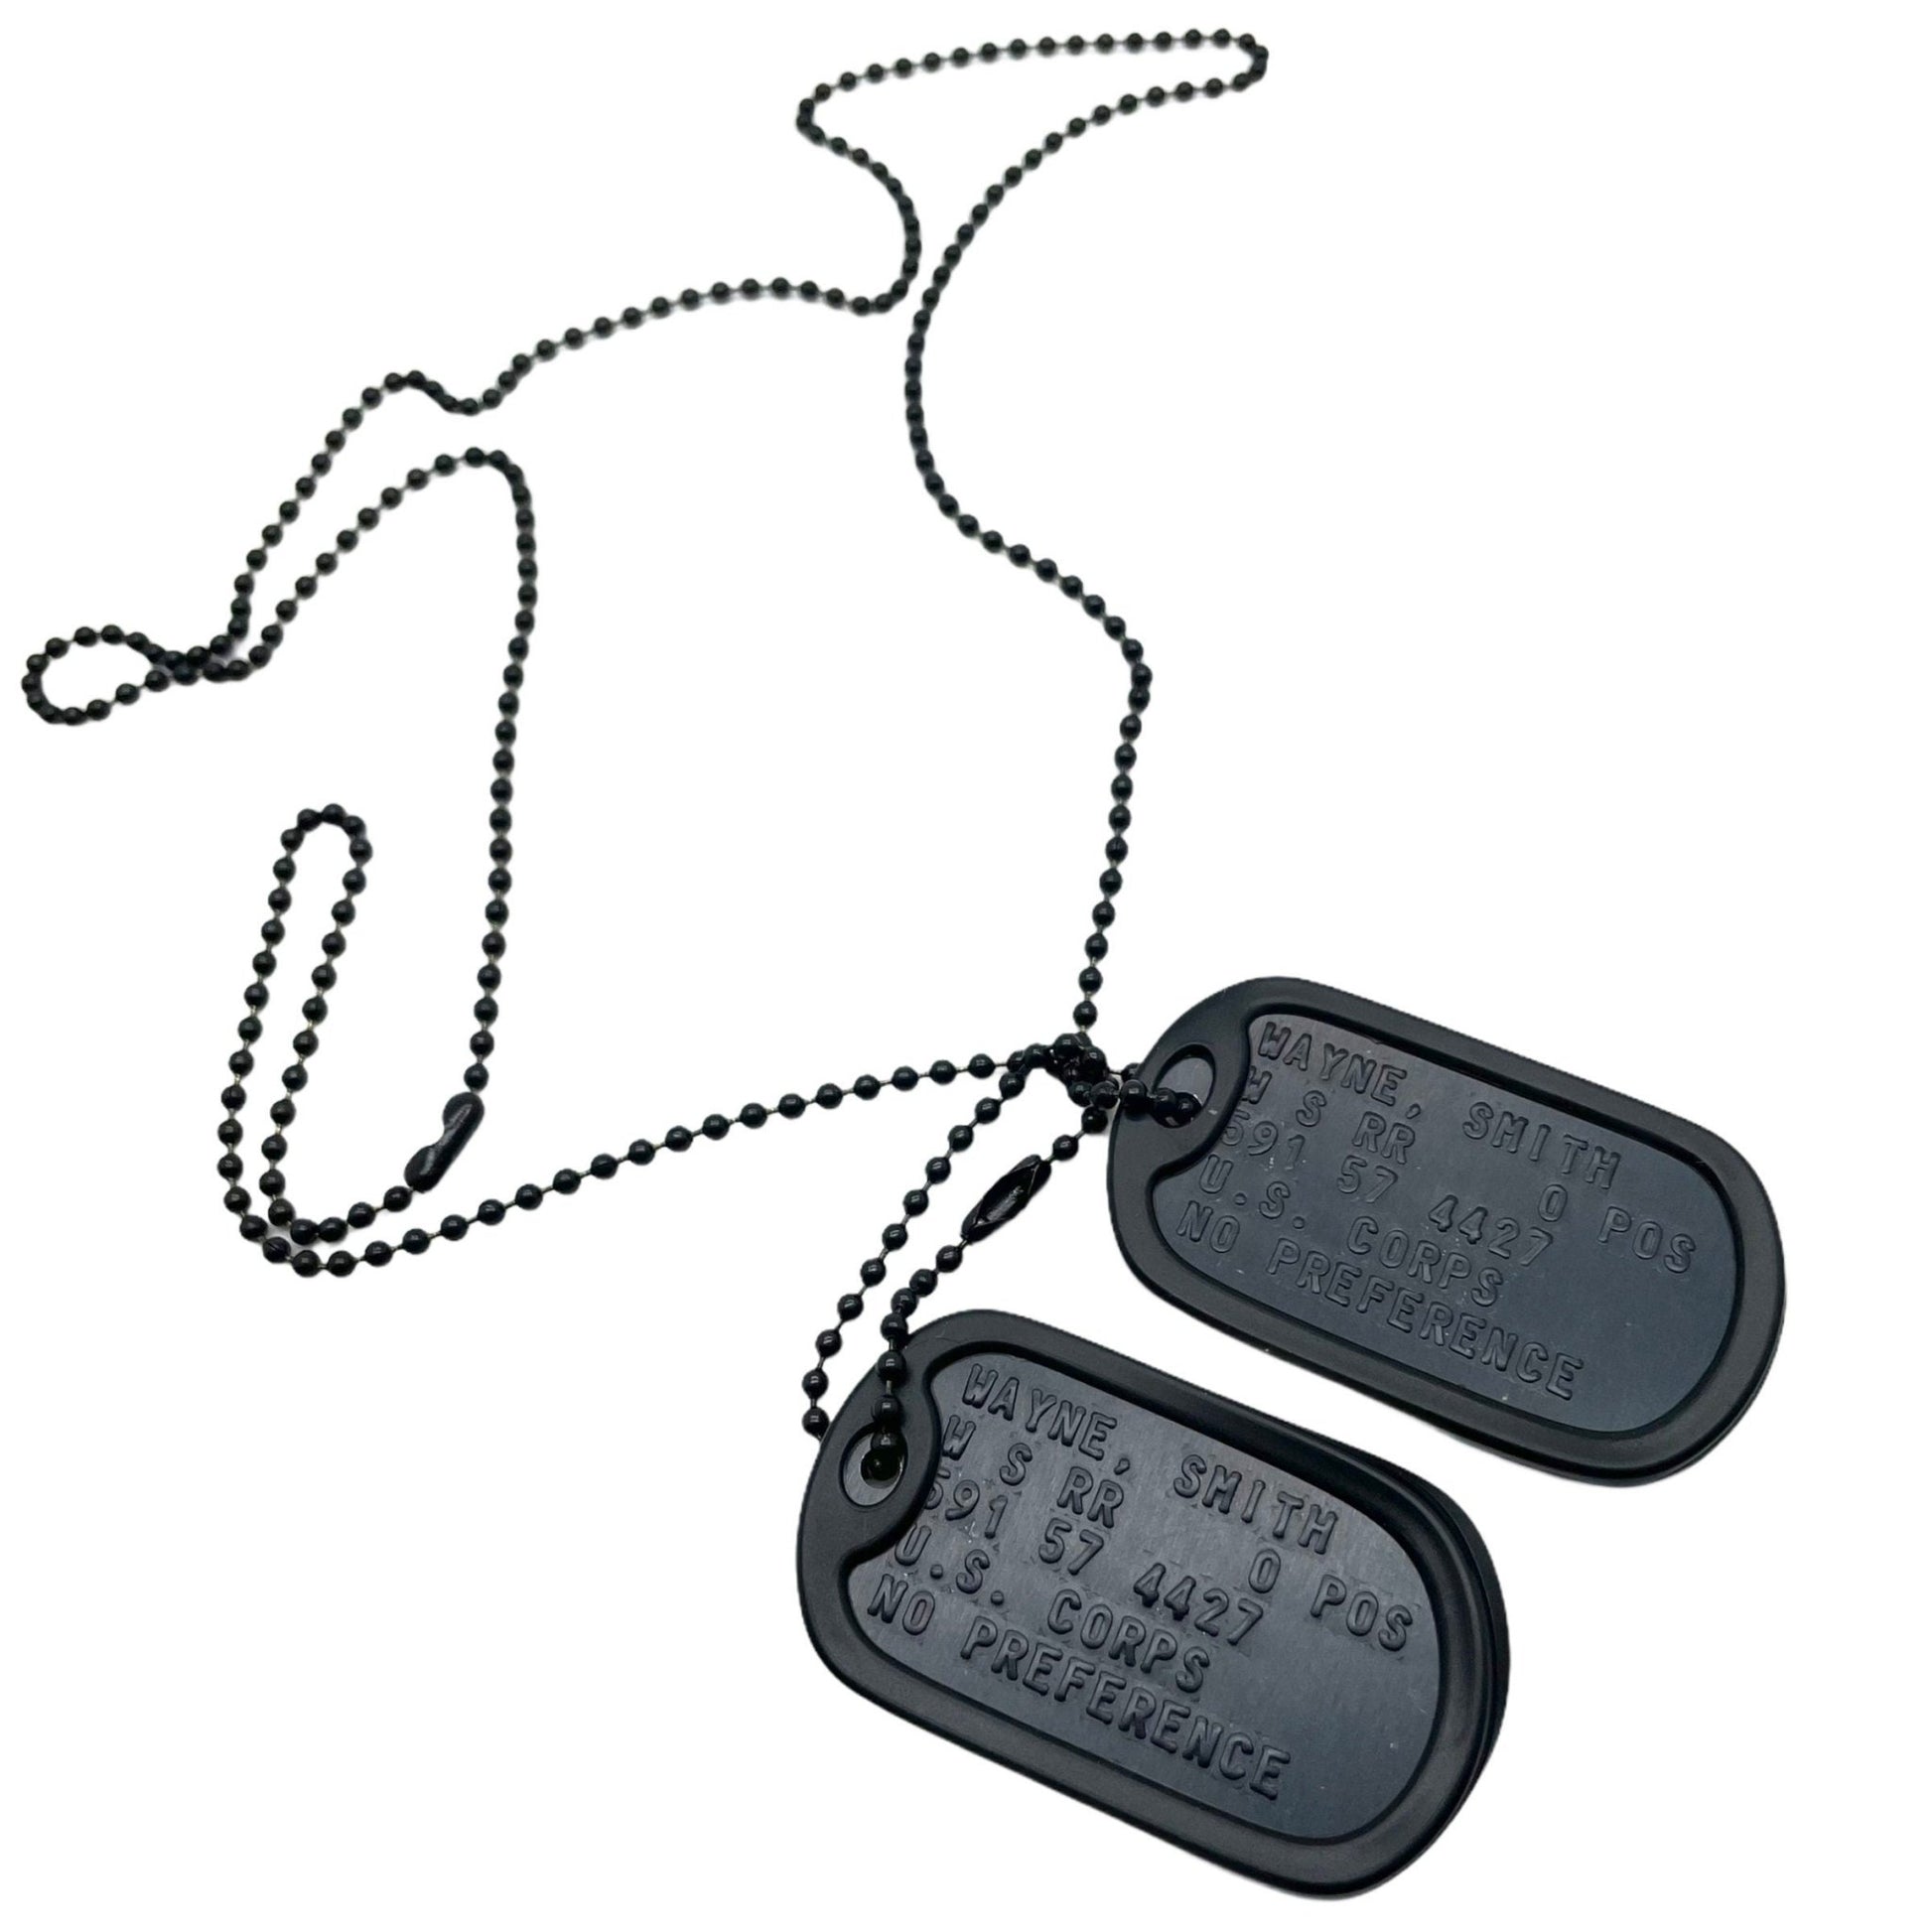 Black special forces u.s. military set personalised army dog tags anodized aluminium - chain & silencer included - made to order - TheDogTagCo